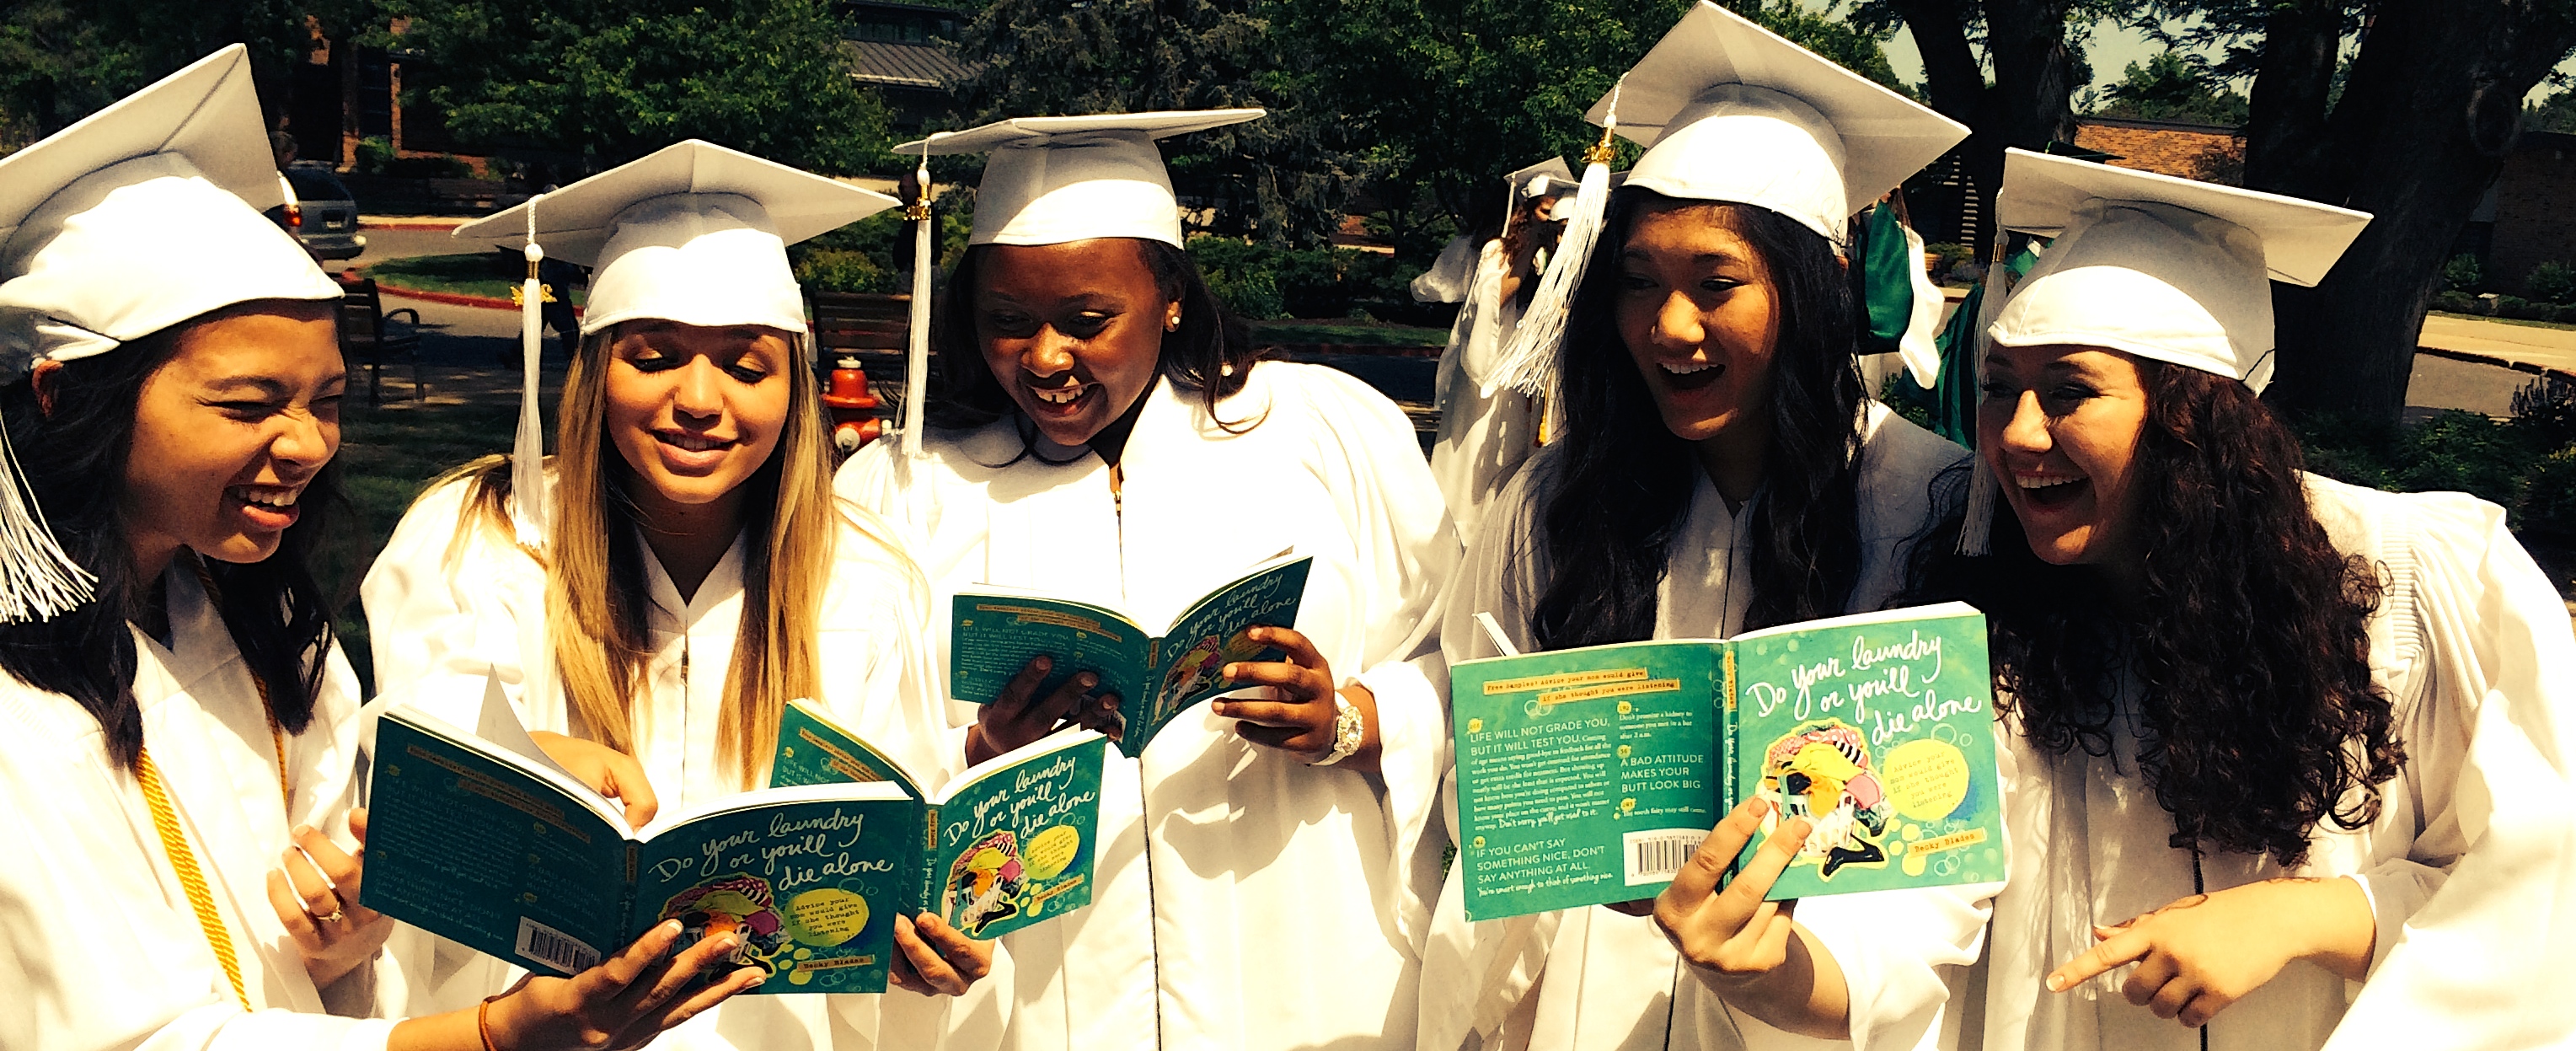 friends at graduation ceremony reading do your laundry or you'll die alone book